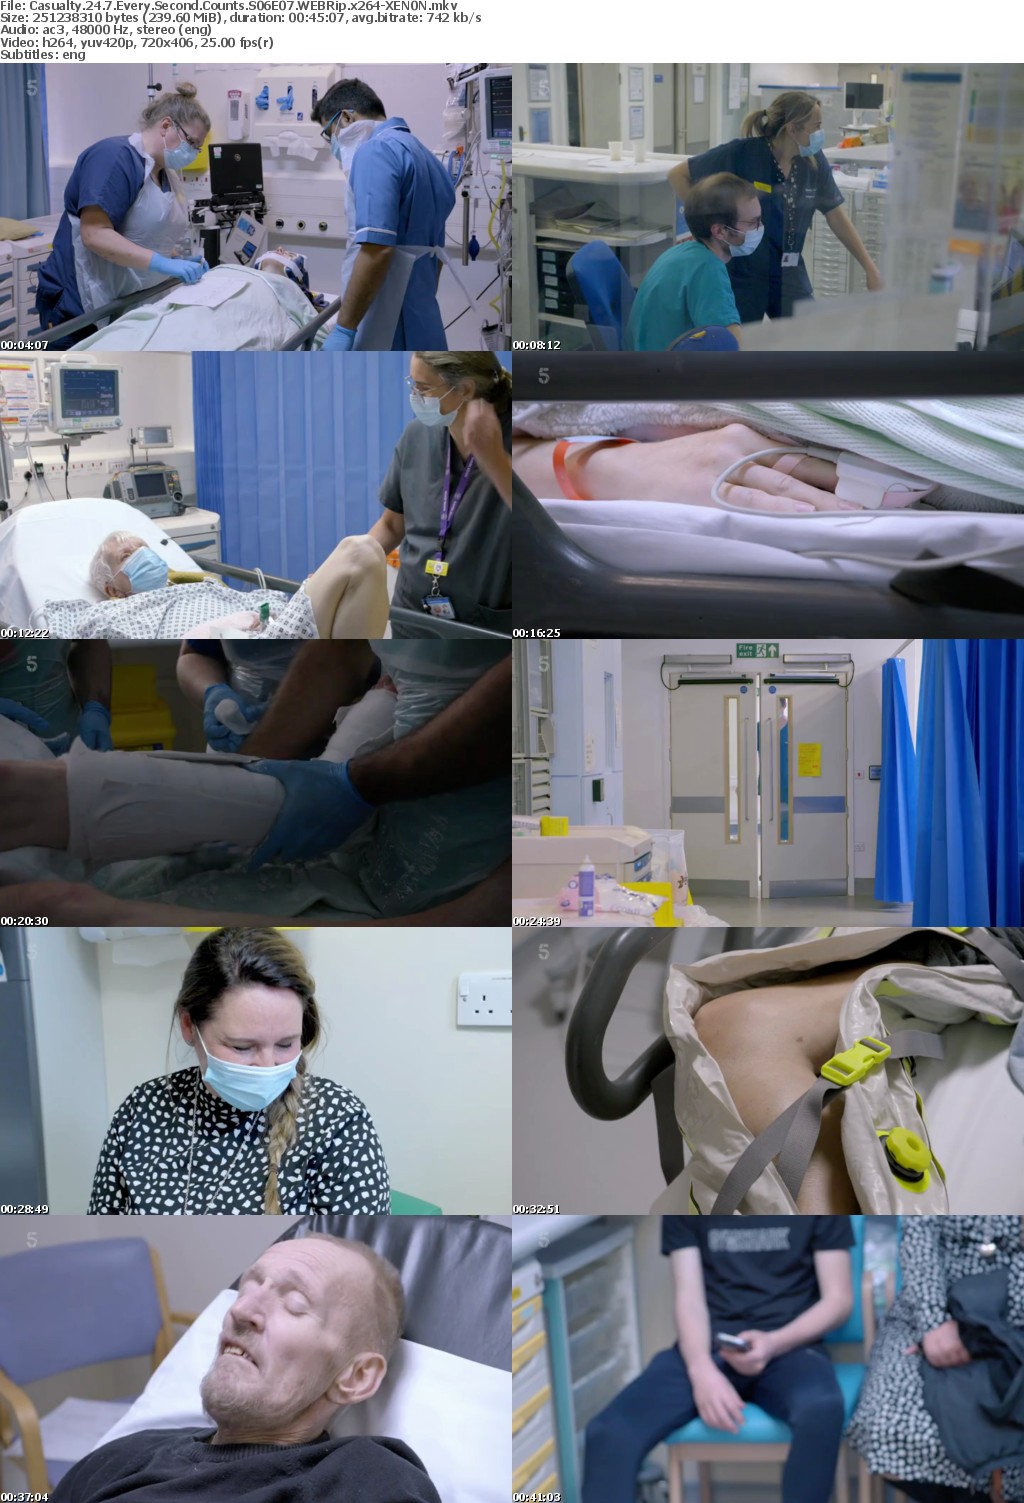 Casualty 24 7 Every Second Counts S06E07 WEBRip x264-XEN0N